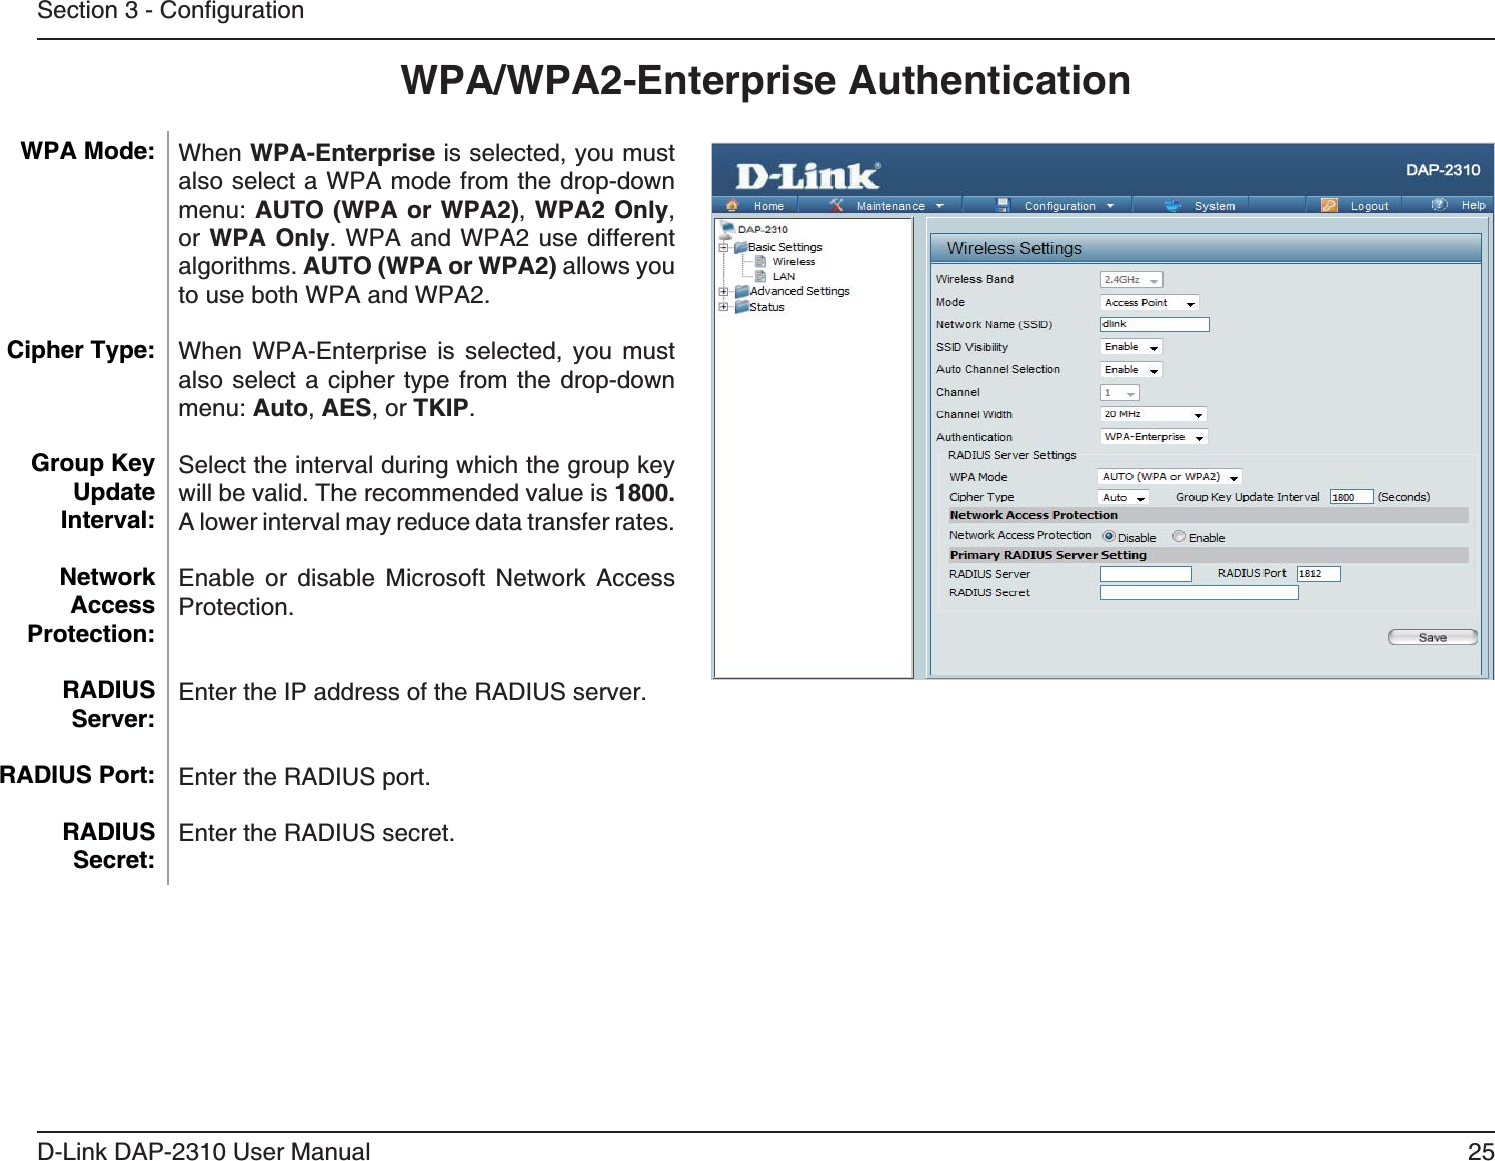 25D-Link DAP-2310 User ManualWPA/WPA2-Enterprise AuthenticationWhen WPA-Enterprise is selected, you must also select a WPA mode from the drop-down AUTO (WPA or WPA2), WPA2 Only, or WPA Only. WPA and WPA2 use different algorithms. AUTO (WPA or WPA2) allows you to use both WPA and WPA2. When WPA-Enterprise is selected, you must also select a cipher type from the drop-down Auto, AES, or TKIP.Select the interval during which the group key will be valid. The recommended value is 1800. A lower interval may reduce data transfer rates.Enable or disable Microsoft Network Access Protection.Enter the IP address of the RADIUS server.Enter the RADIUS port.Enter the RADIUS secret.WPA Mode: Cipher Type:Group Key Update Interval:Network Access Protection:RADIUS Server:RADIUS Port:RADIUS Secret: